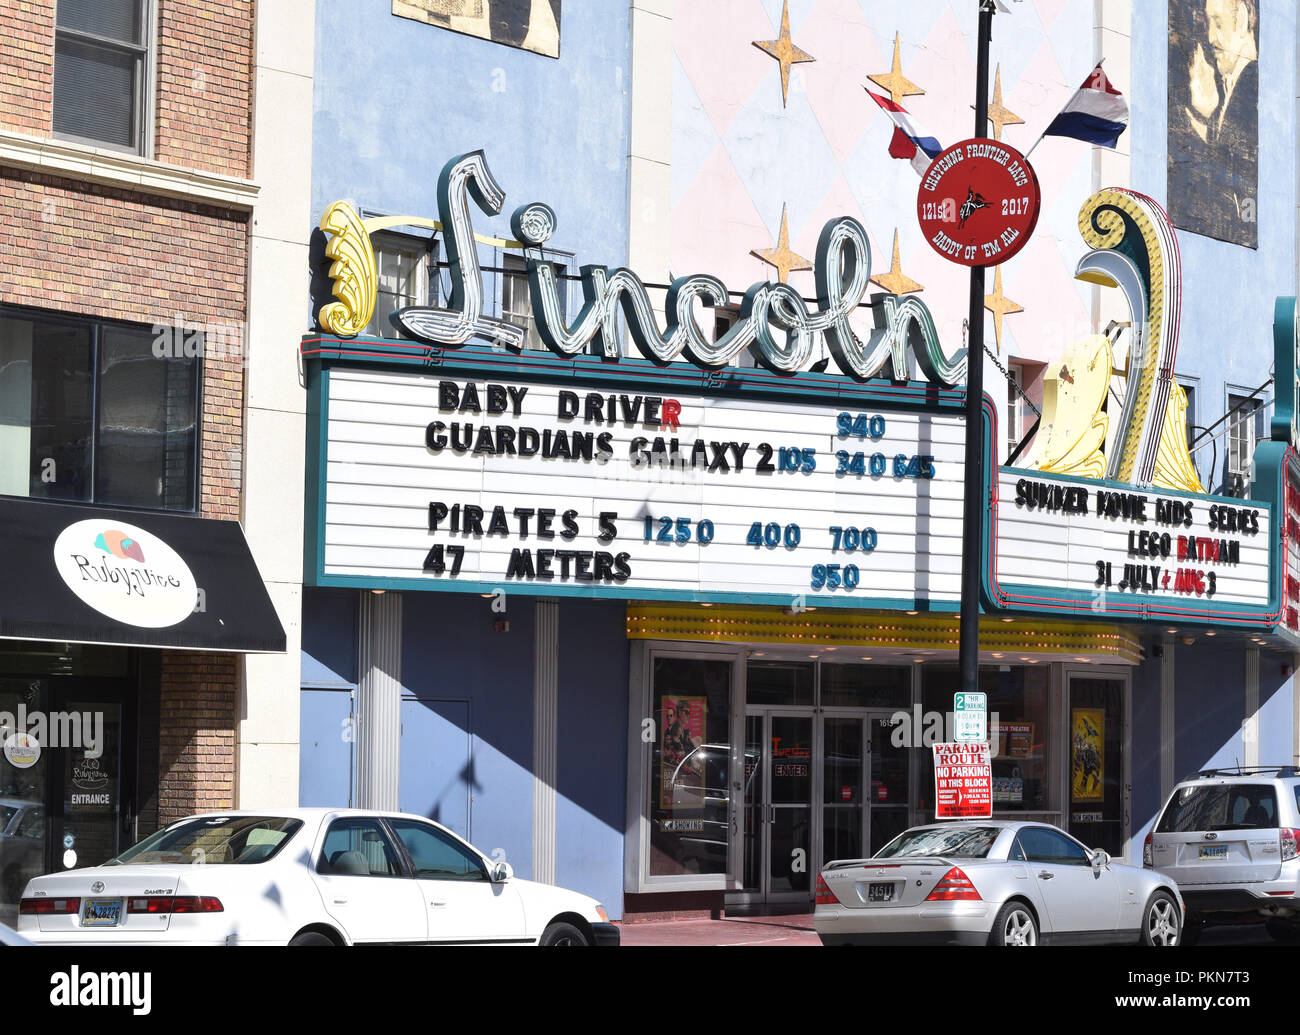 Movie Theater Marquee High Resolution Stock Photography And Images - Alamy